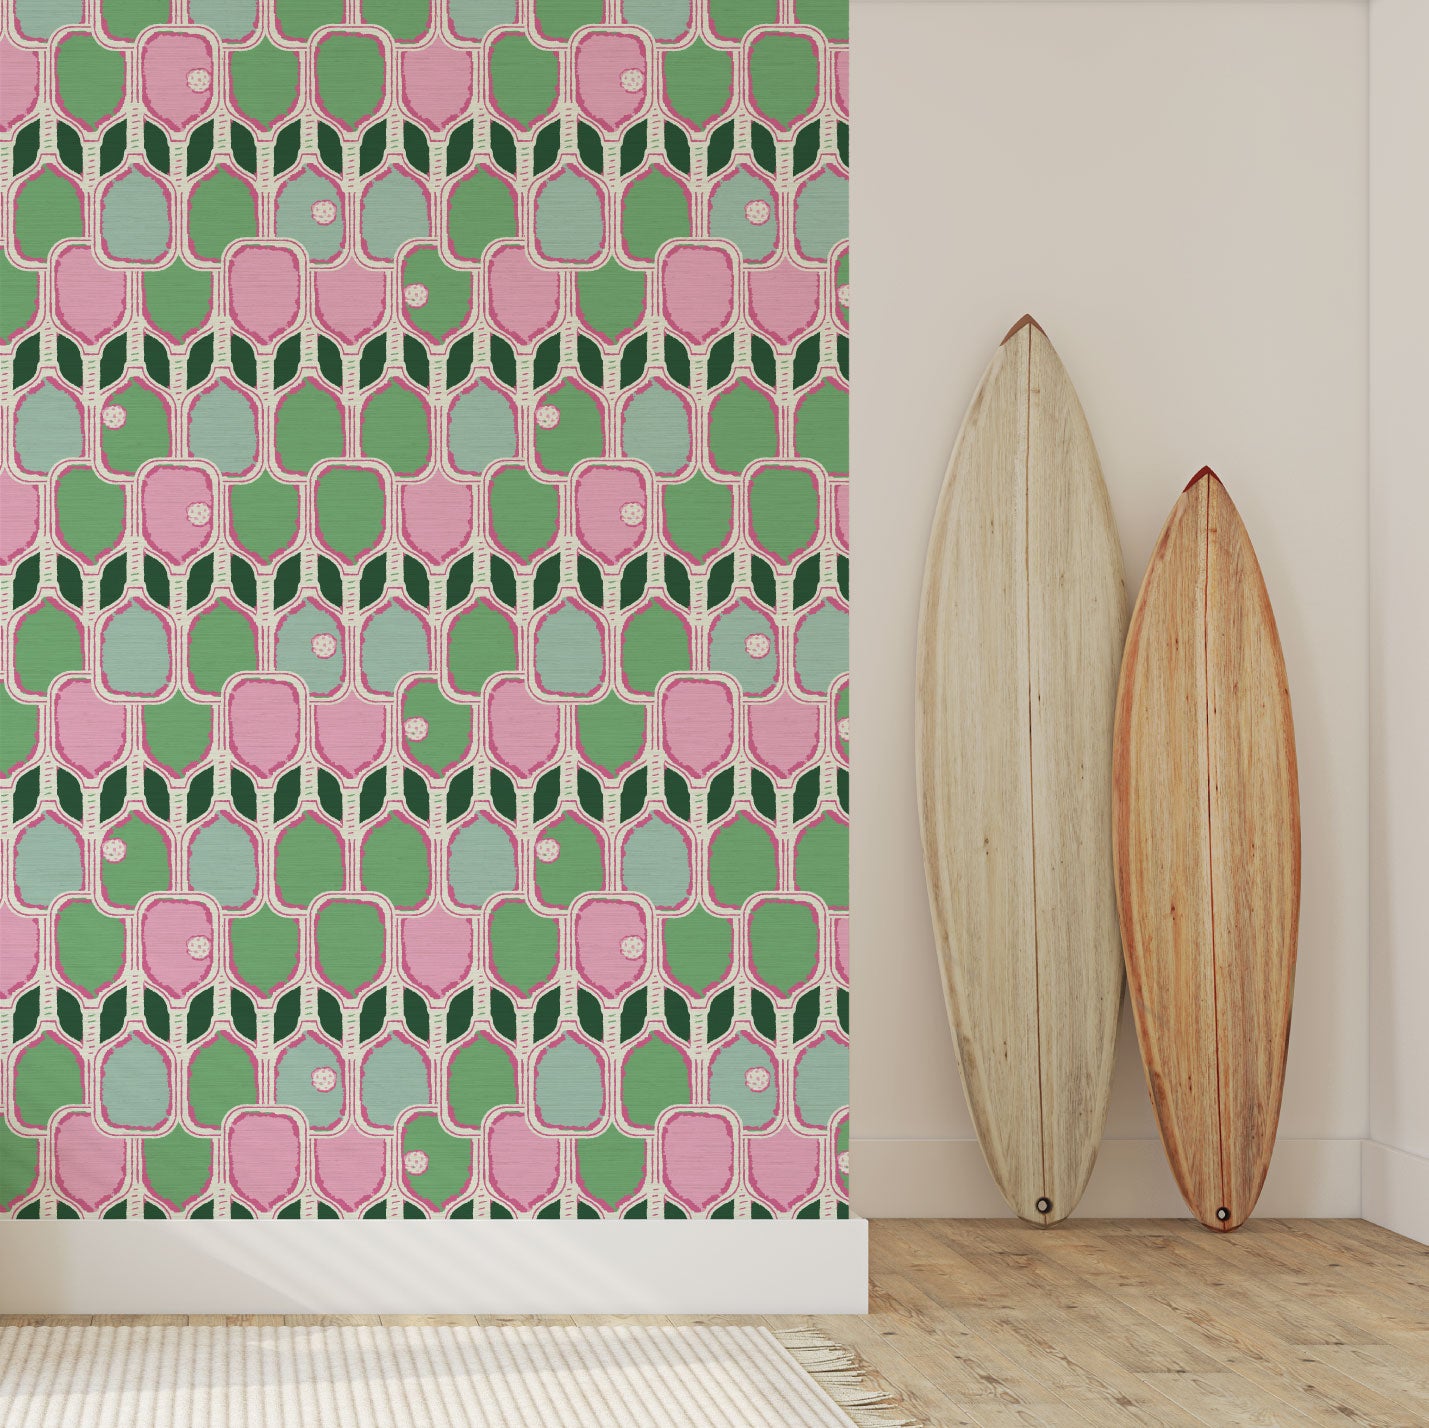 Grasscloth wallpaper Natural Textured Eco-Friendly Non-toxic High-quality Sustainable Interior Design Bold Custom Tailor-made Retro chic Tropical Jungle Coastal Cabana preppy Pickleball Sport gameroom kids stripe horizontal palm trees paddle pink hot pink kelly green mint teal foyer entrance surf